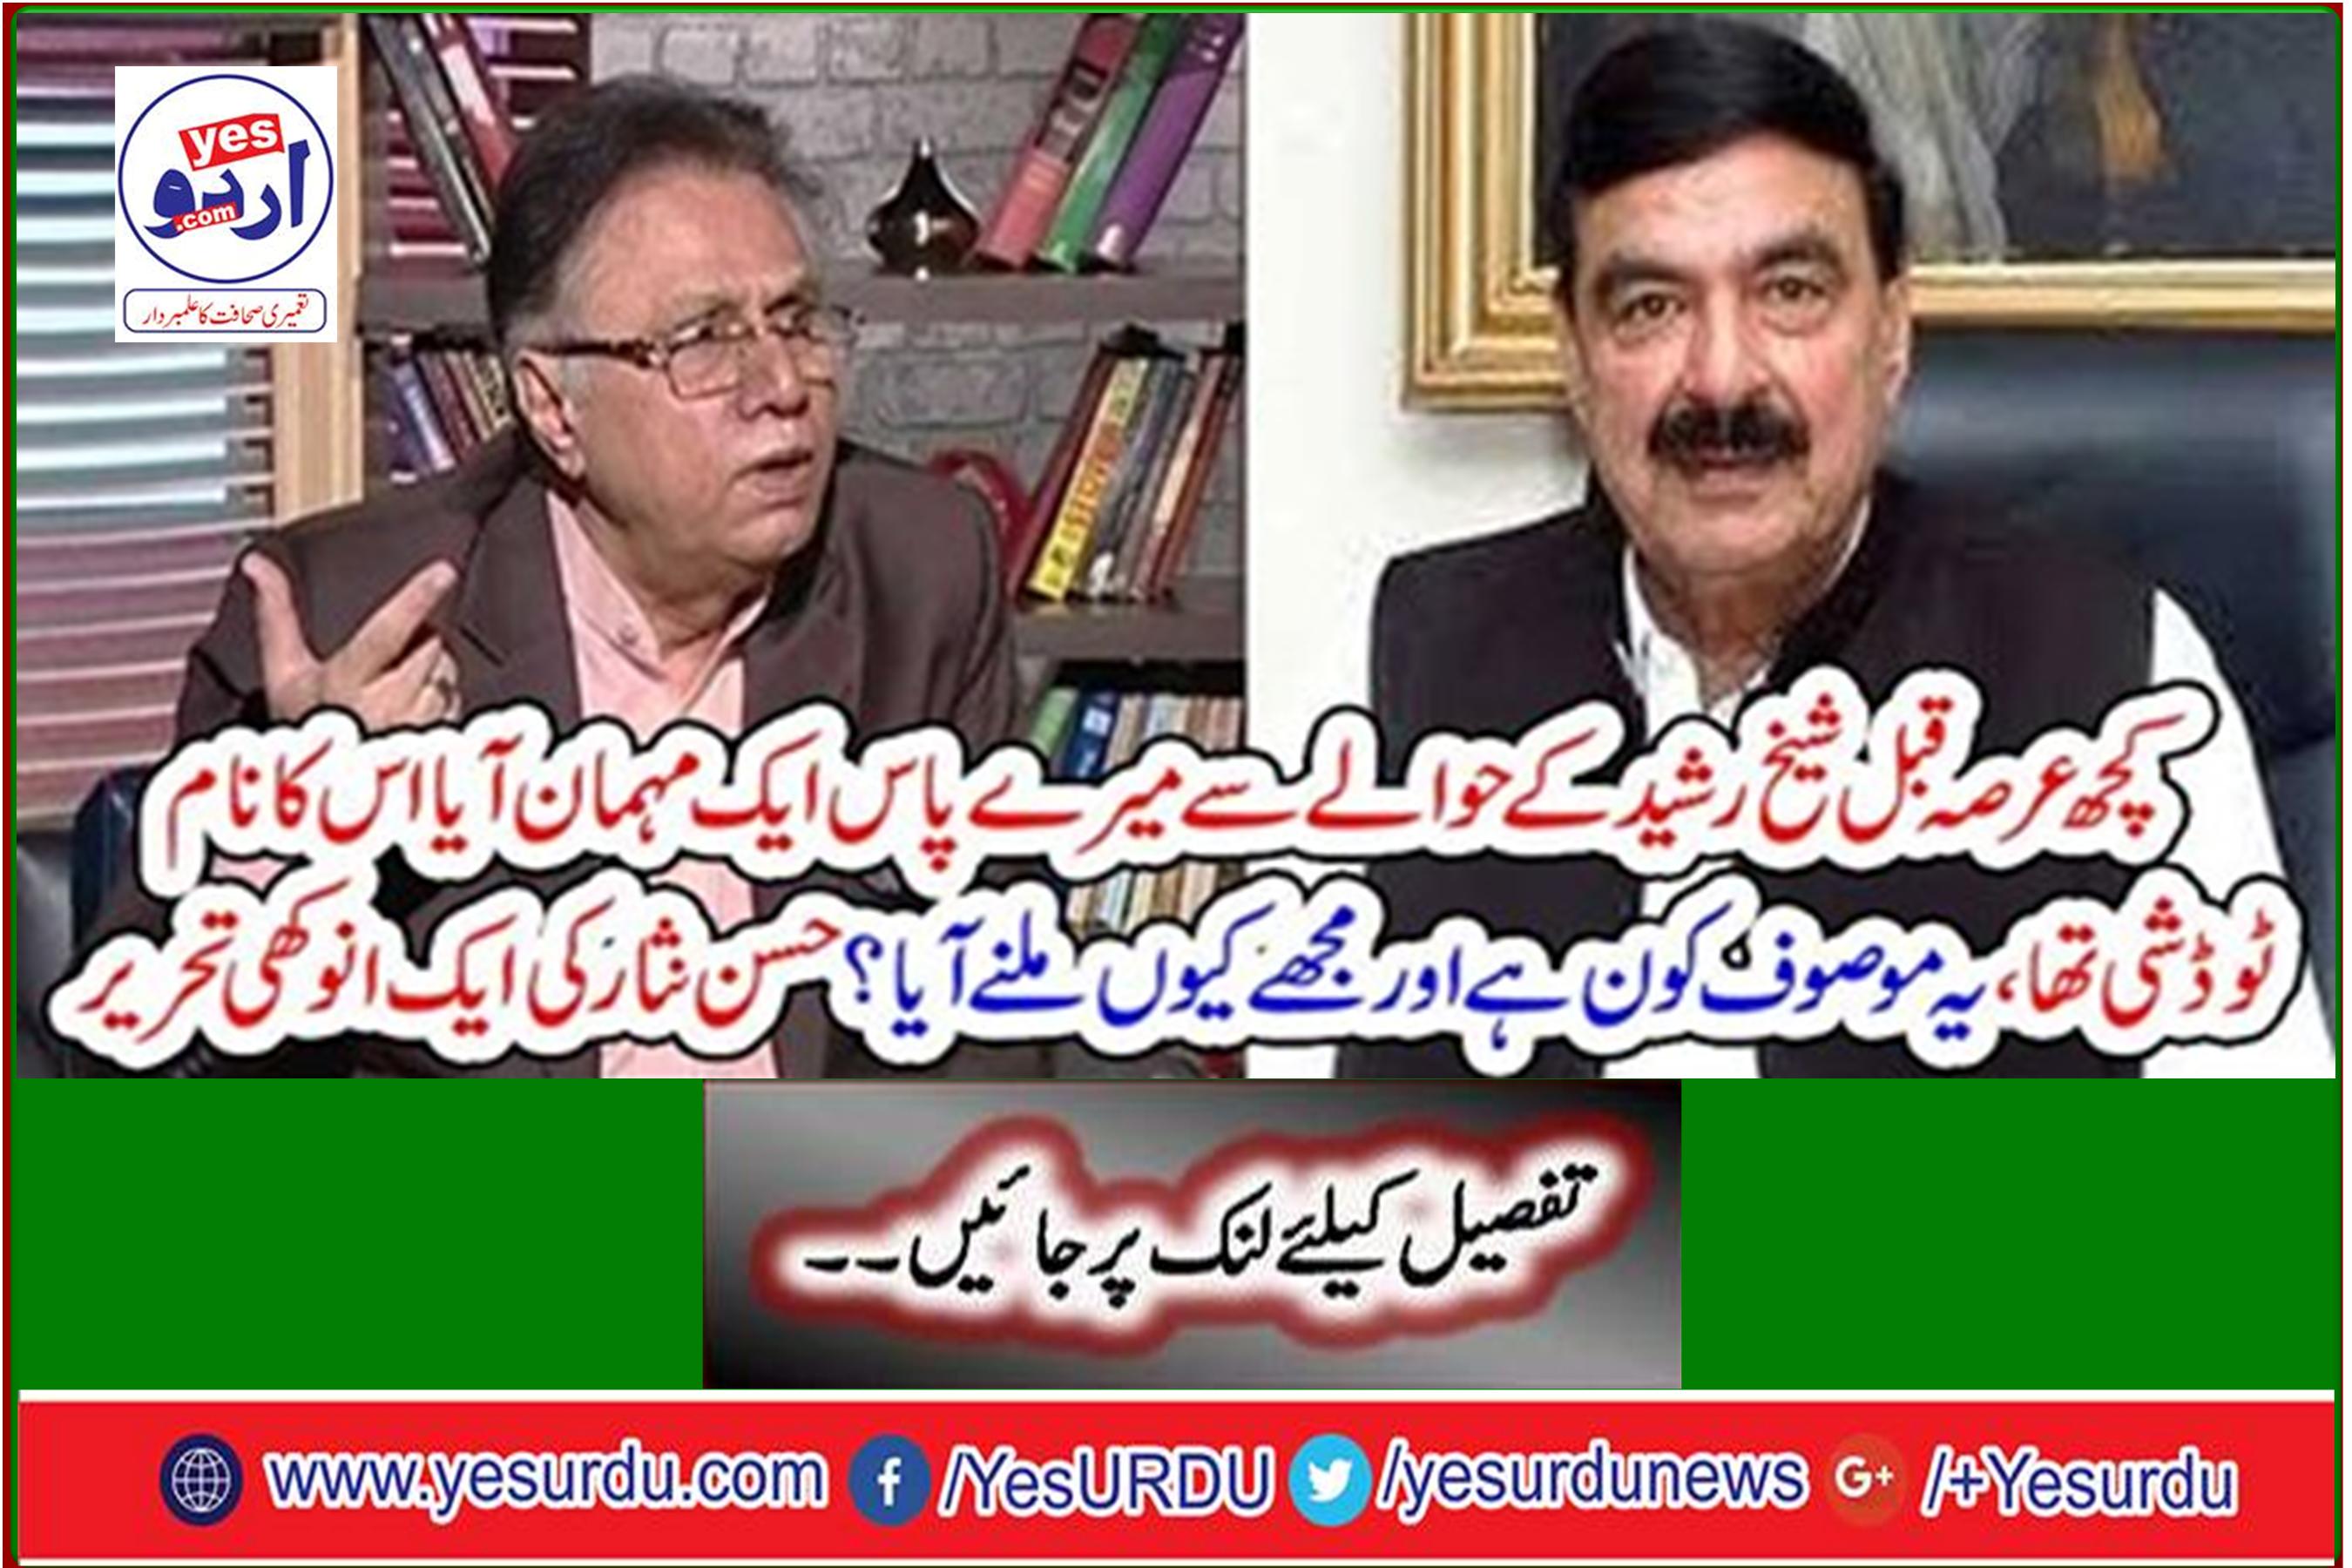 Some time ago, a guest came to me about Sheikh Rasheed, his name was Todd Shi. A unique writing by Hassan Nisar